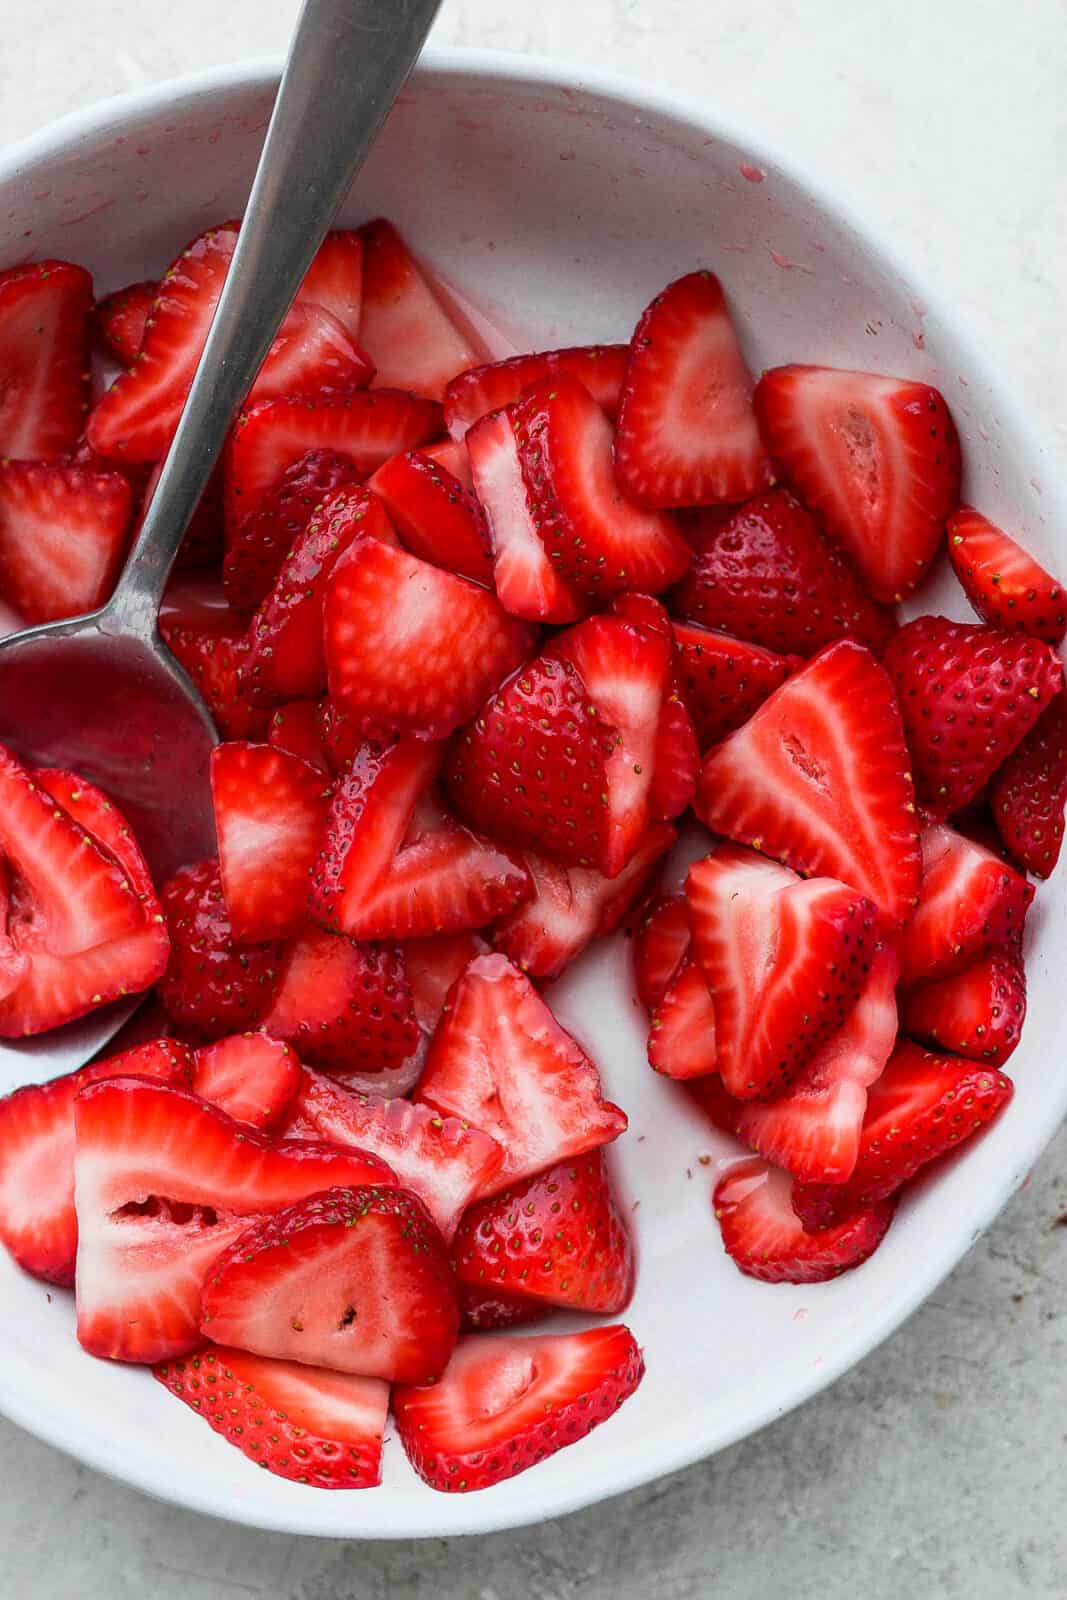 Macerated strawberries in a dish.